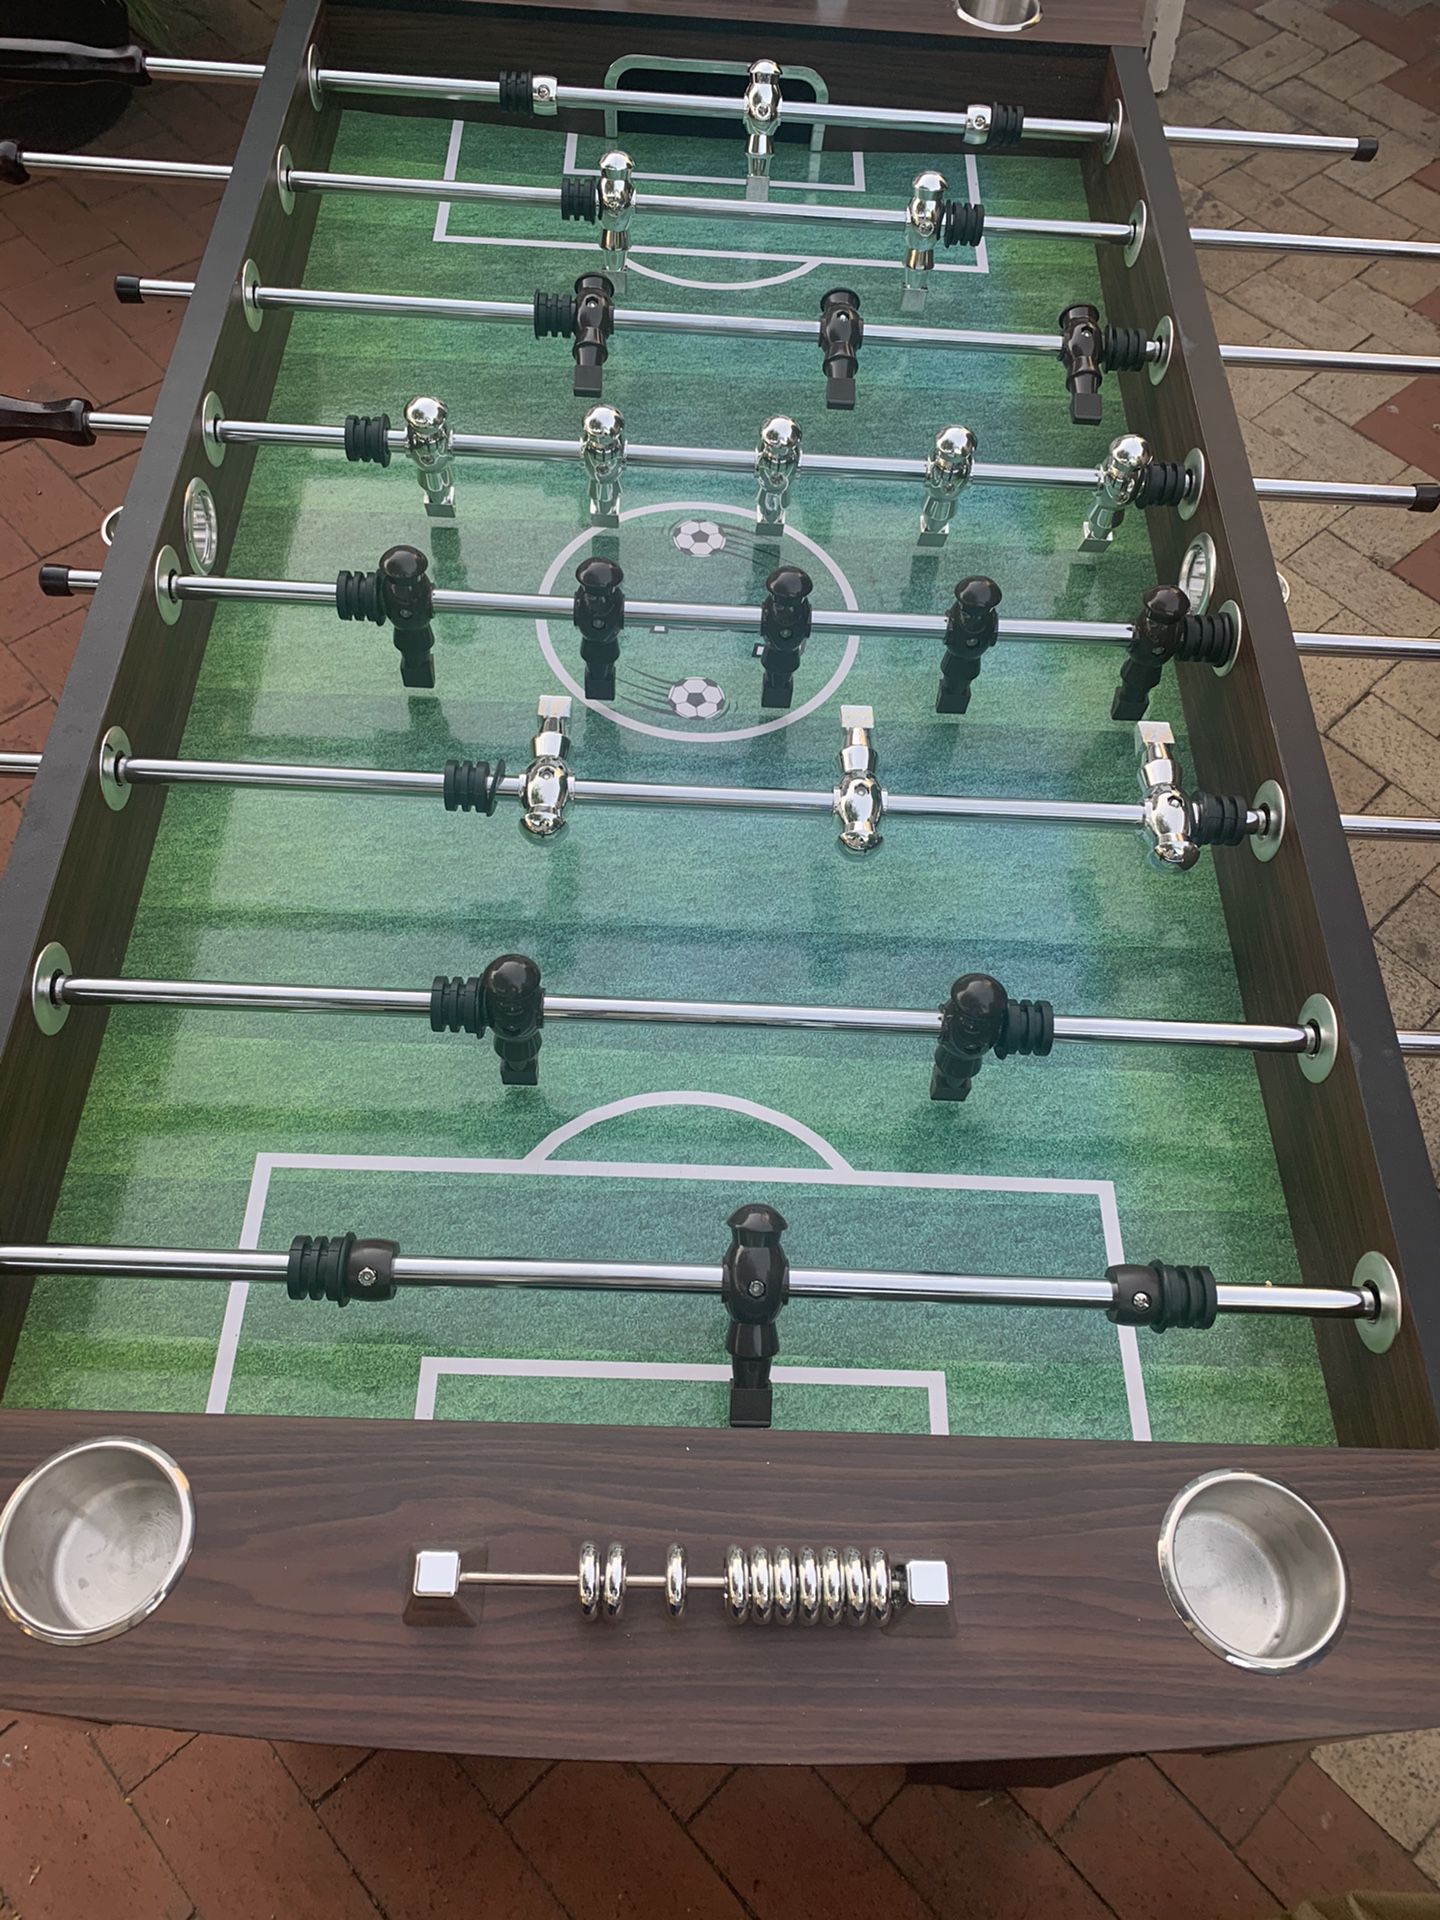 A foosball table for the whole family to have fun